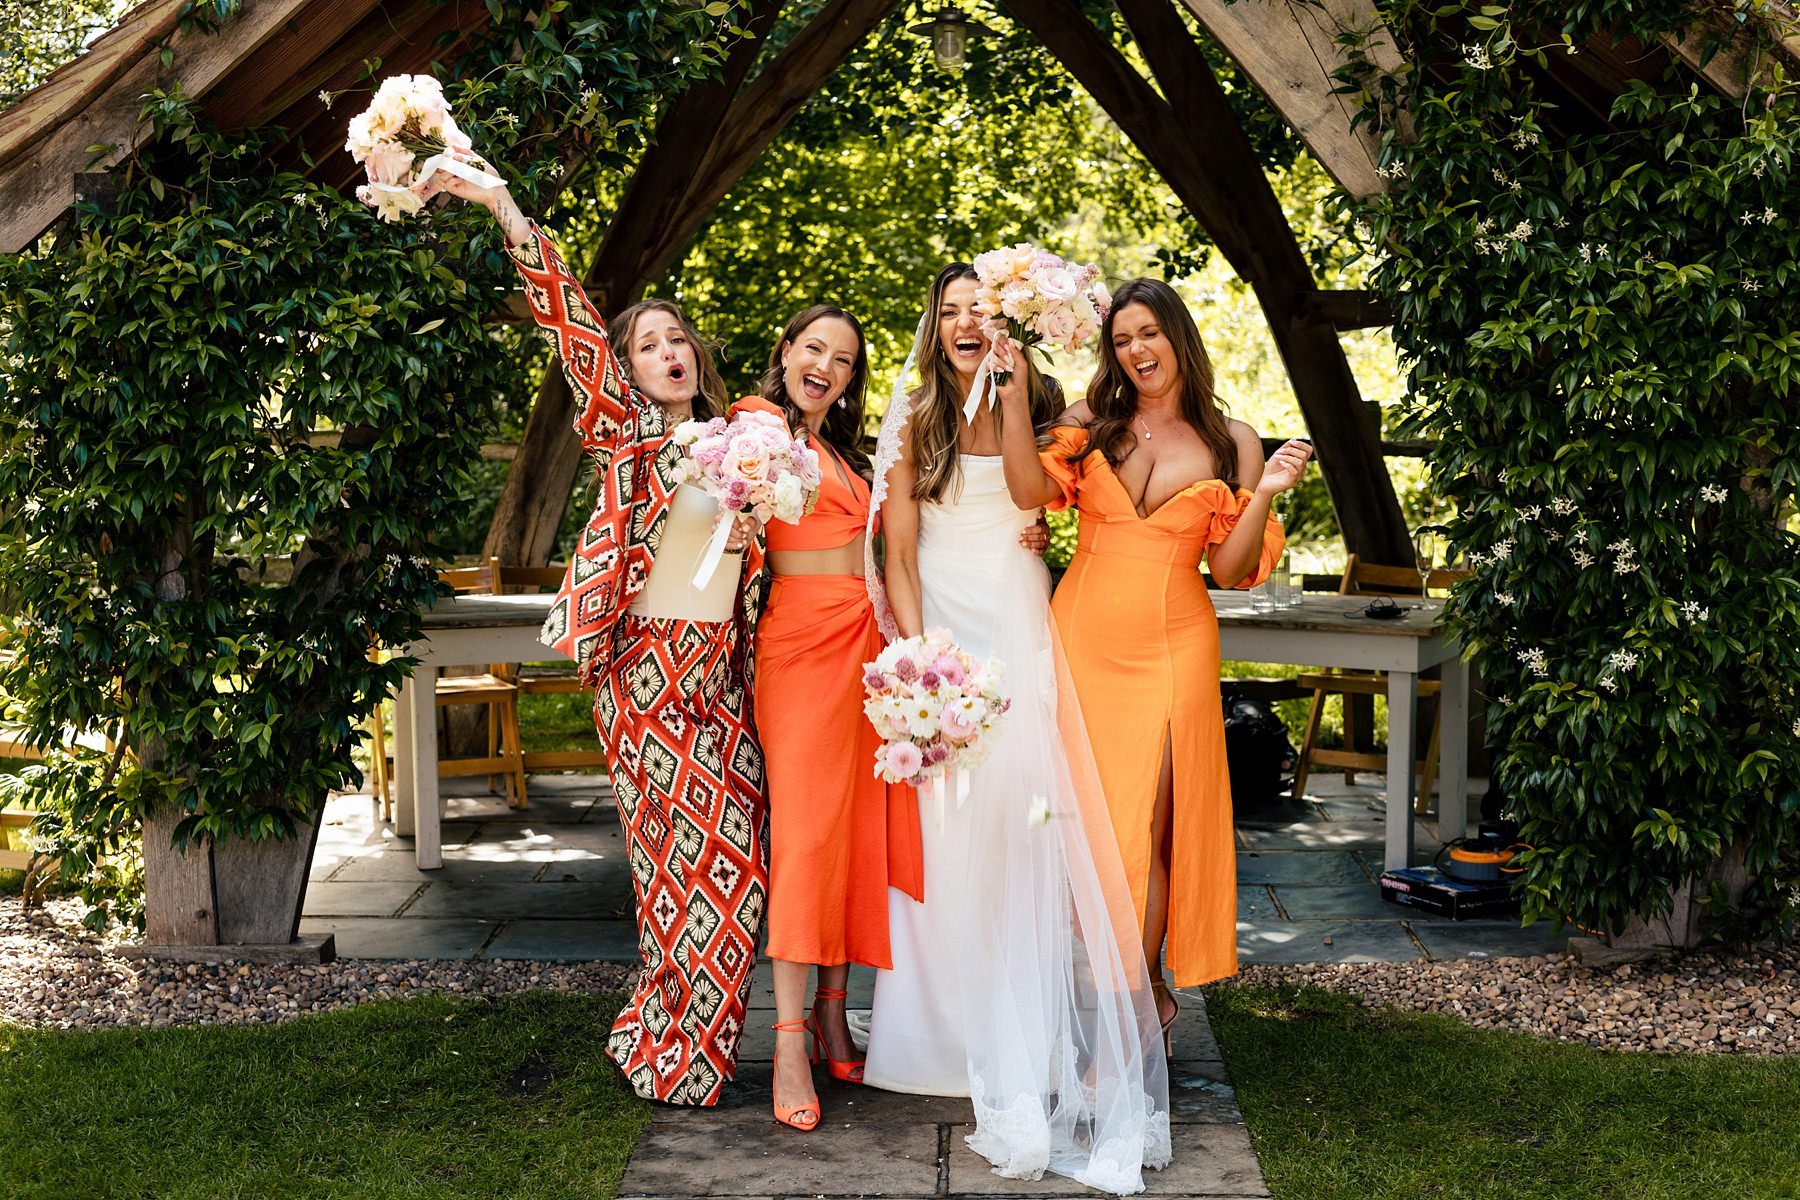 A bride and her bridesmaids cheer and laugh at Millbridge Court, the bride wearing white and the bridesmaids in warm orange outfits.